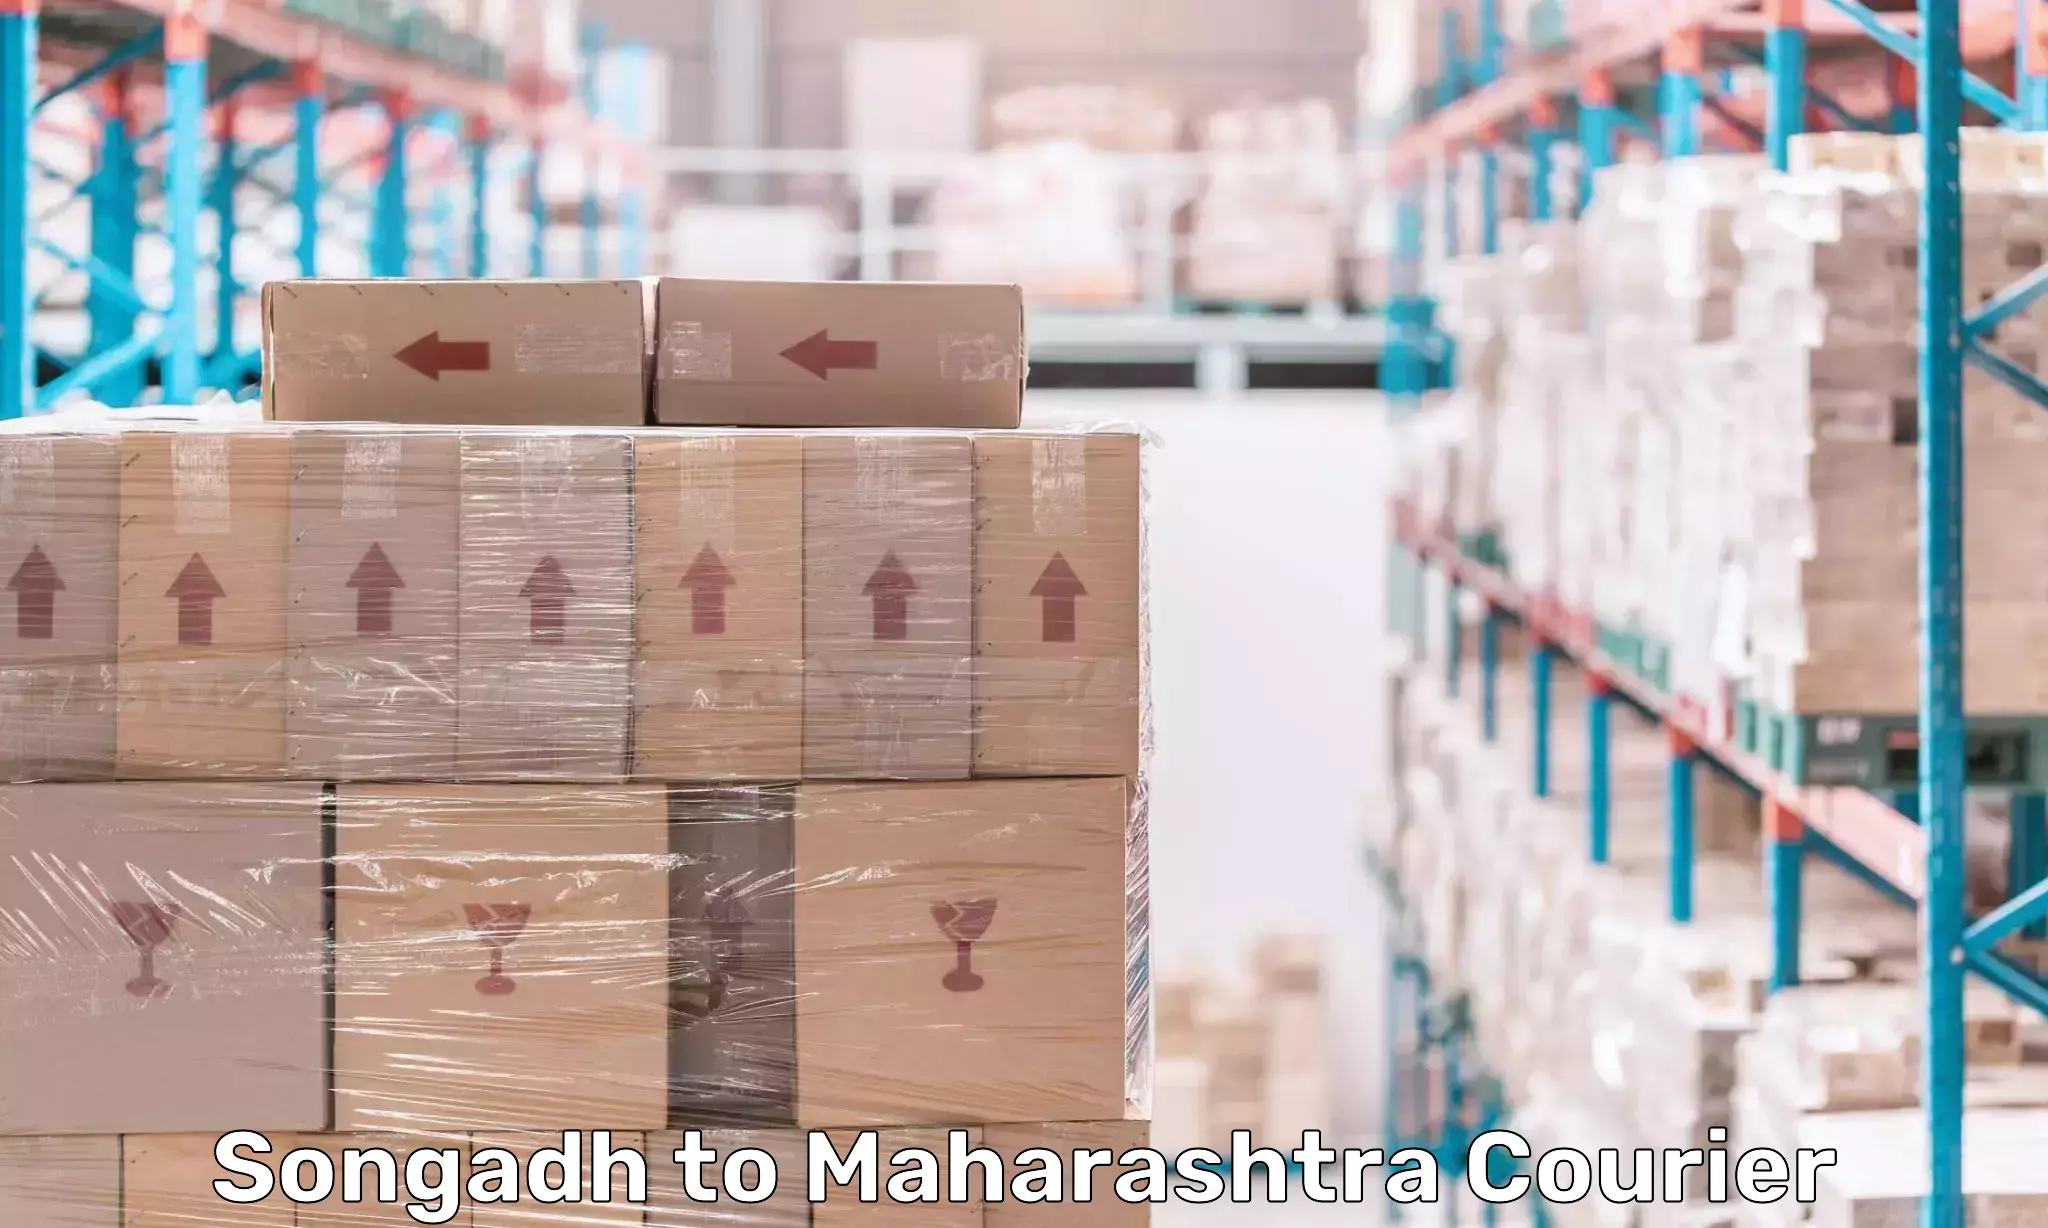 Multi-service courier options Songadh to Maharashtra